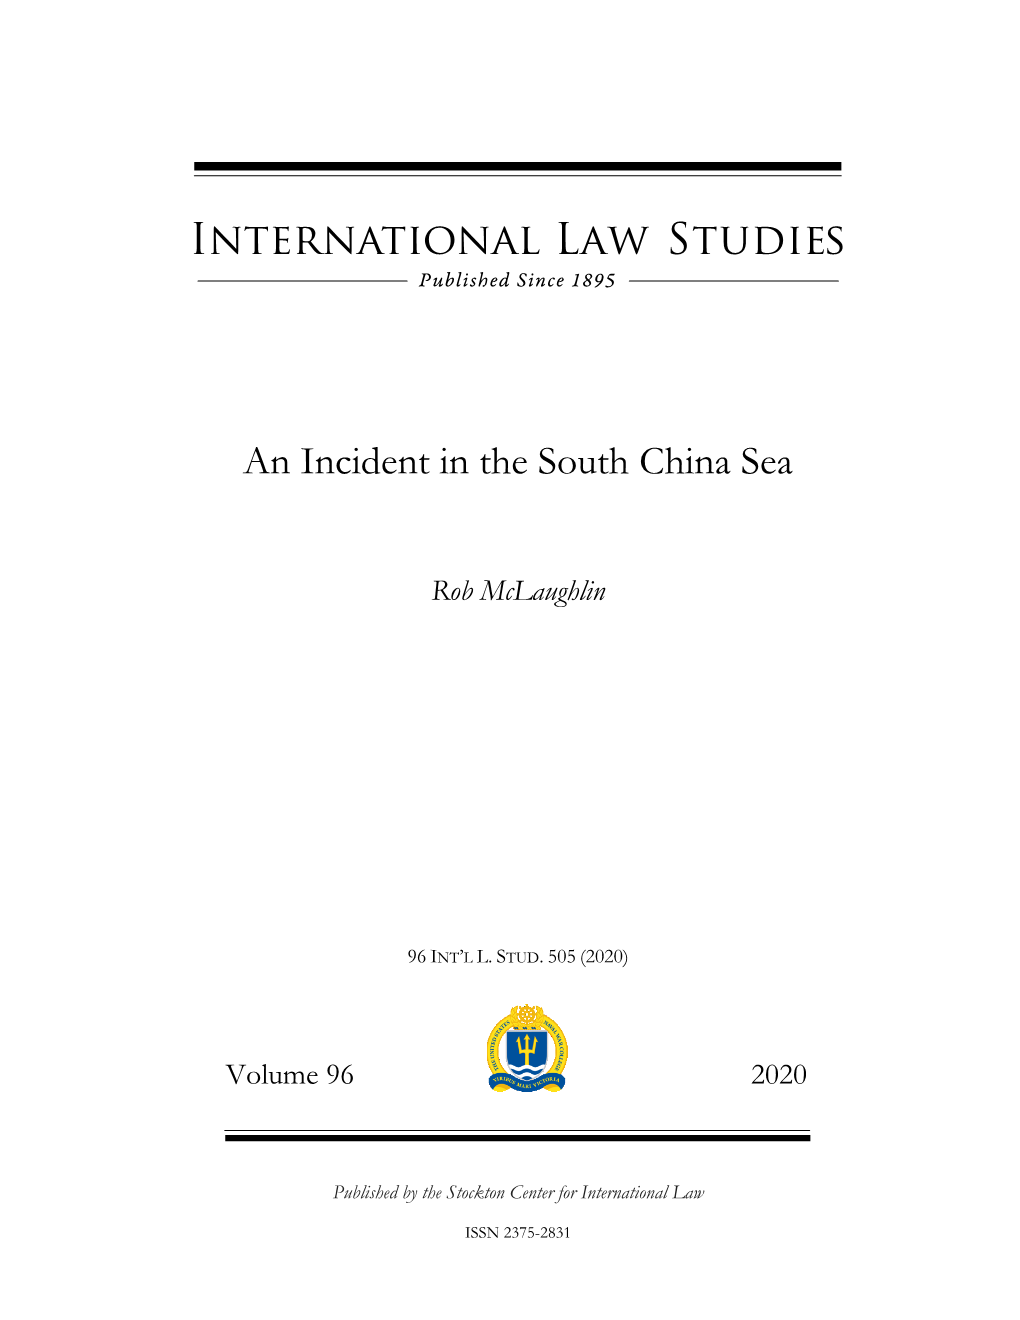 An Incident in the South China Sea